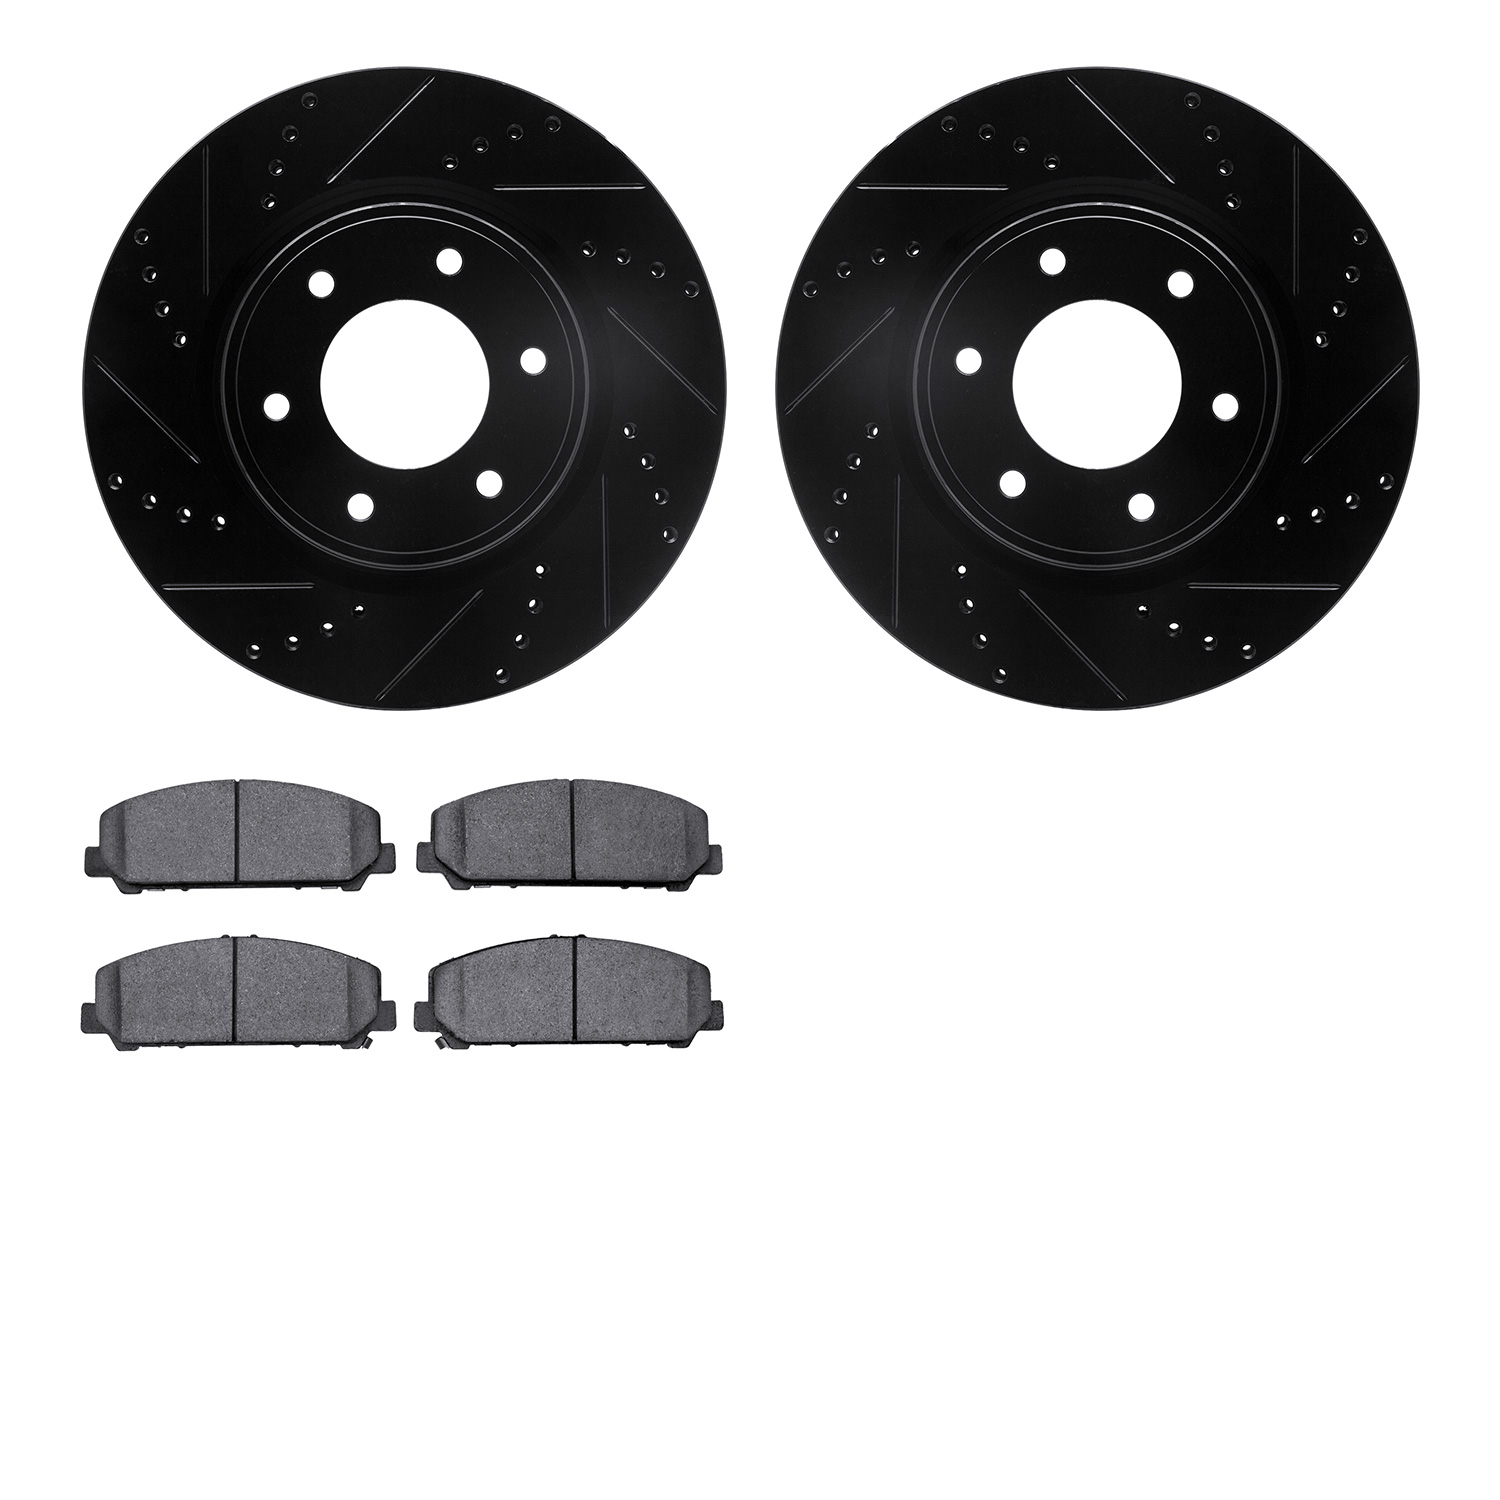 8302-67119 Drilled/Slotted Brake Rotors with 3000-Series Ceramic Brake Pads Kit [Black], Fits Select Infiniti/Nissan, Position: